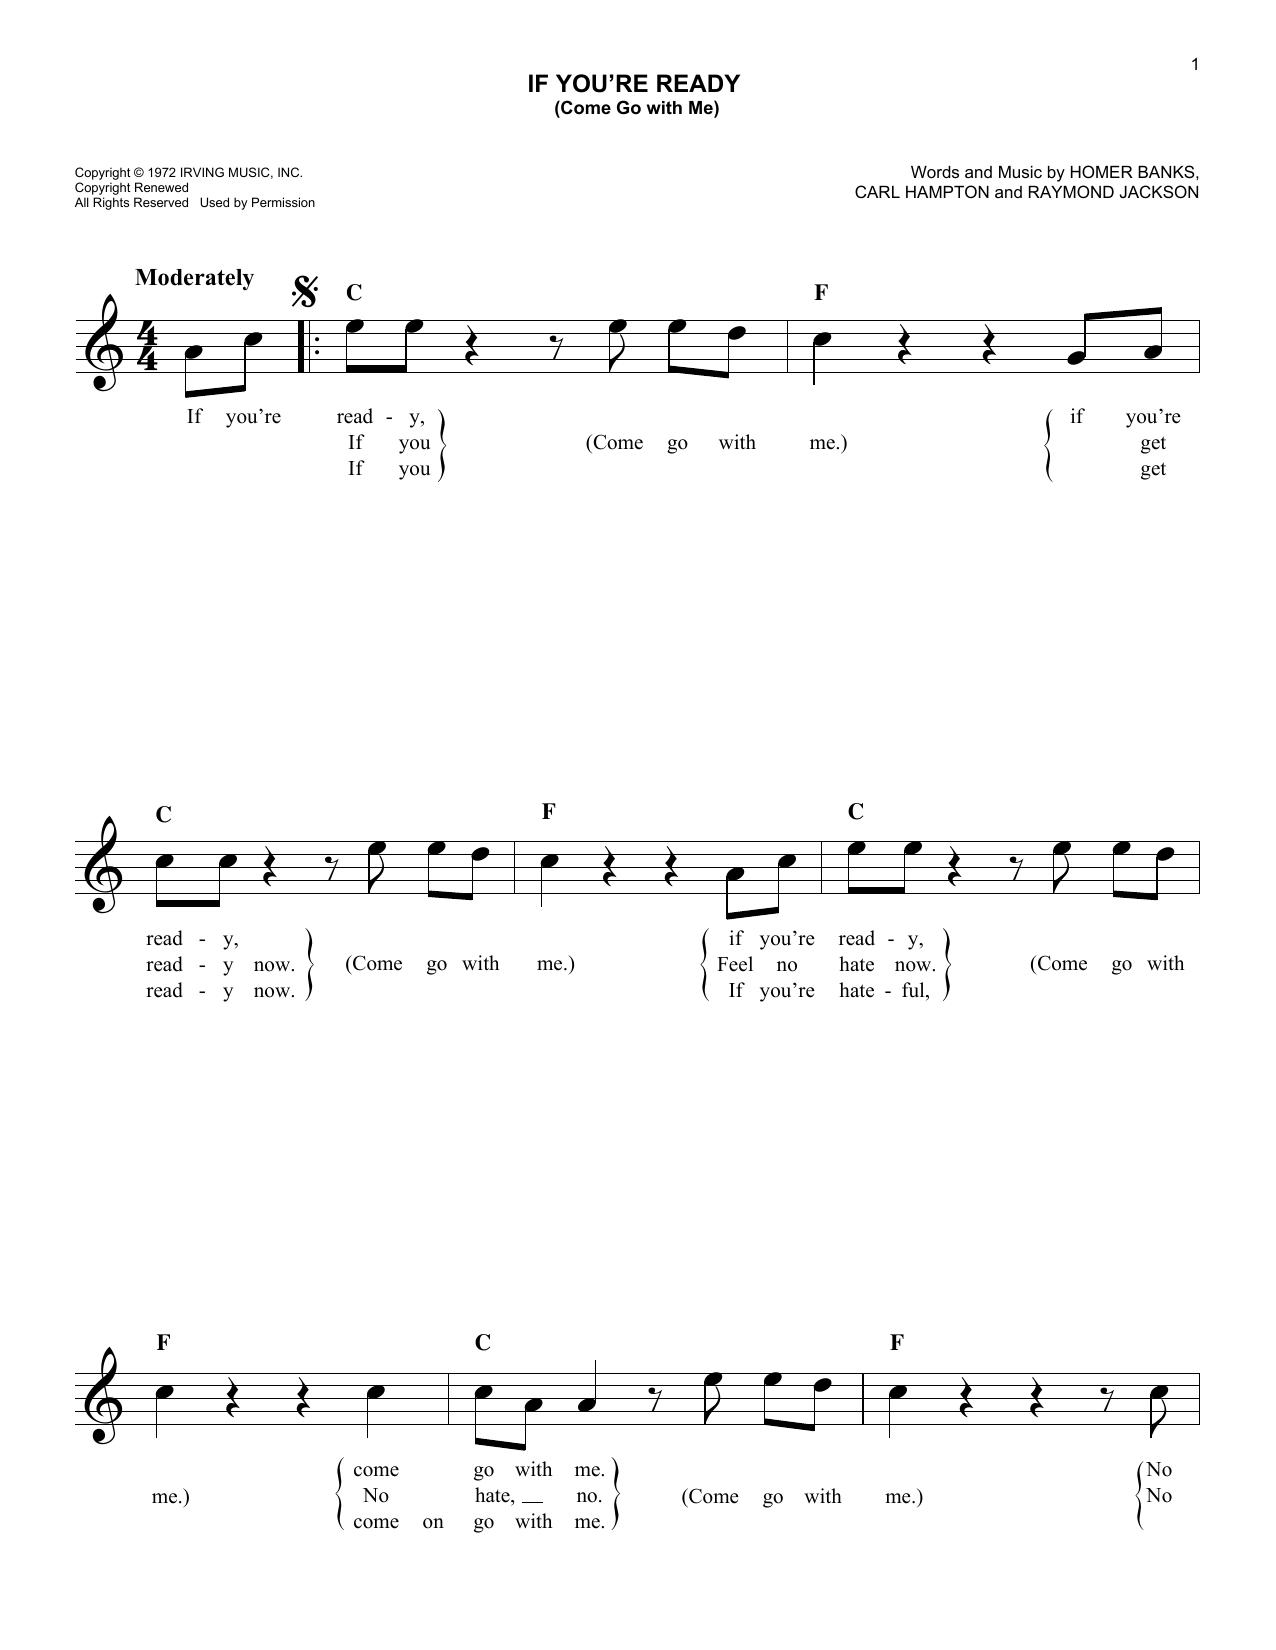 Download The Staple Singers If You're Ready (Come Go With Me) Sheet Music